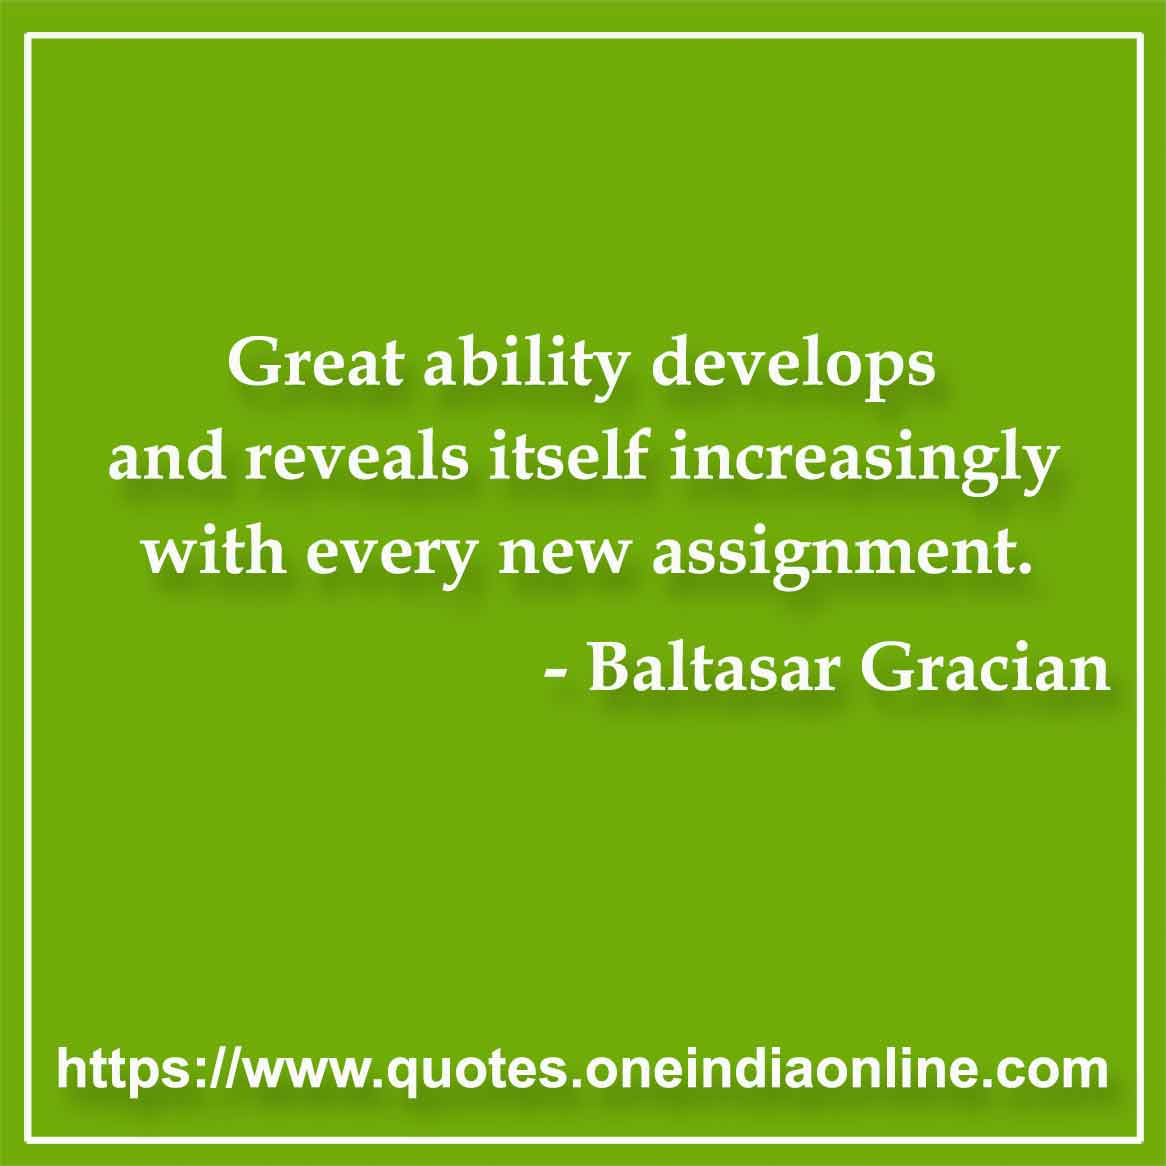 Great ability develops and reveals itself increasingly with every new assignment.

- Talent Quotes by Baltasar Gracian